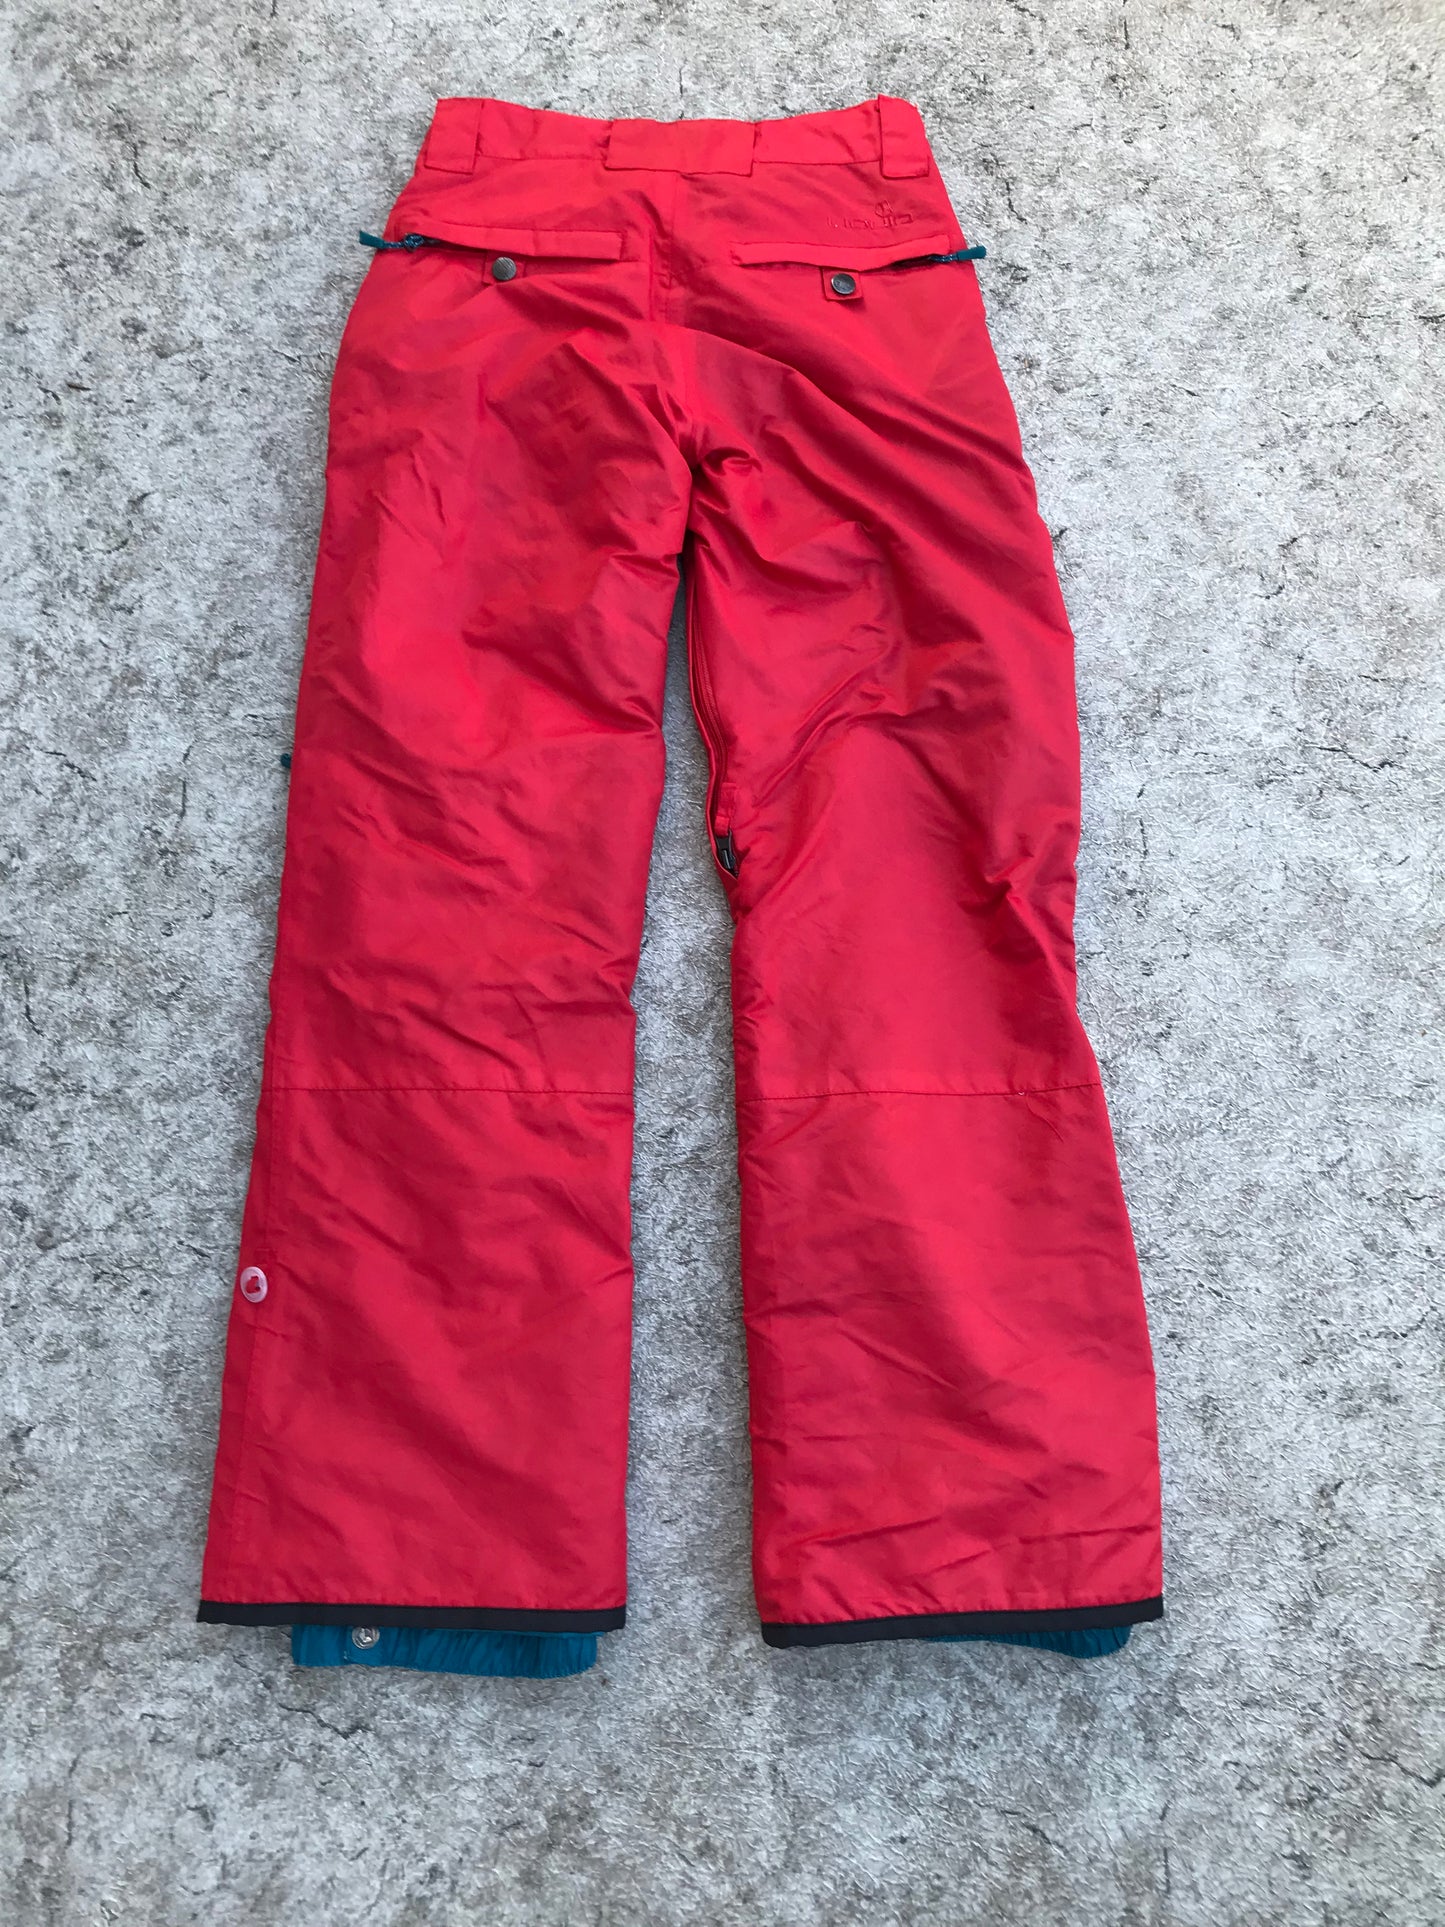 Snow Pants Ladies Size X  Small Child Size 16 Youth Liquid Waterproof Snowboarding Brick Red New Demo Model